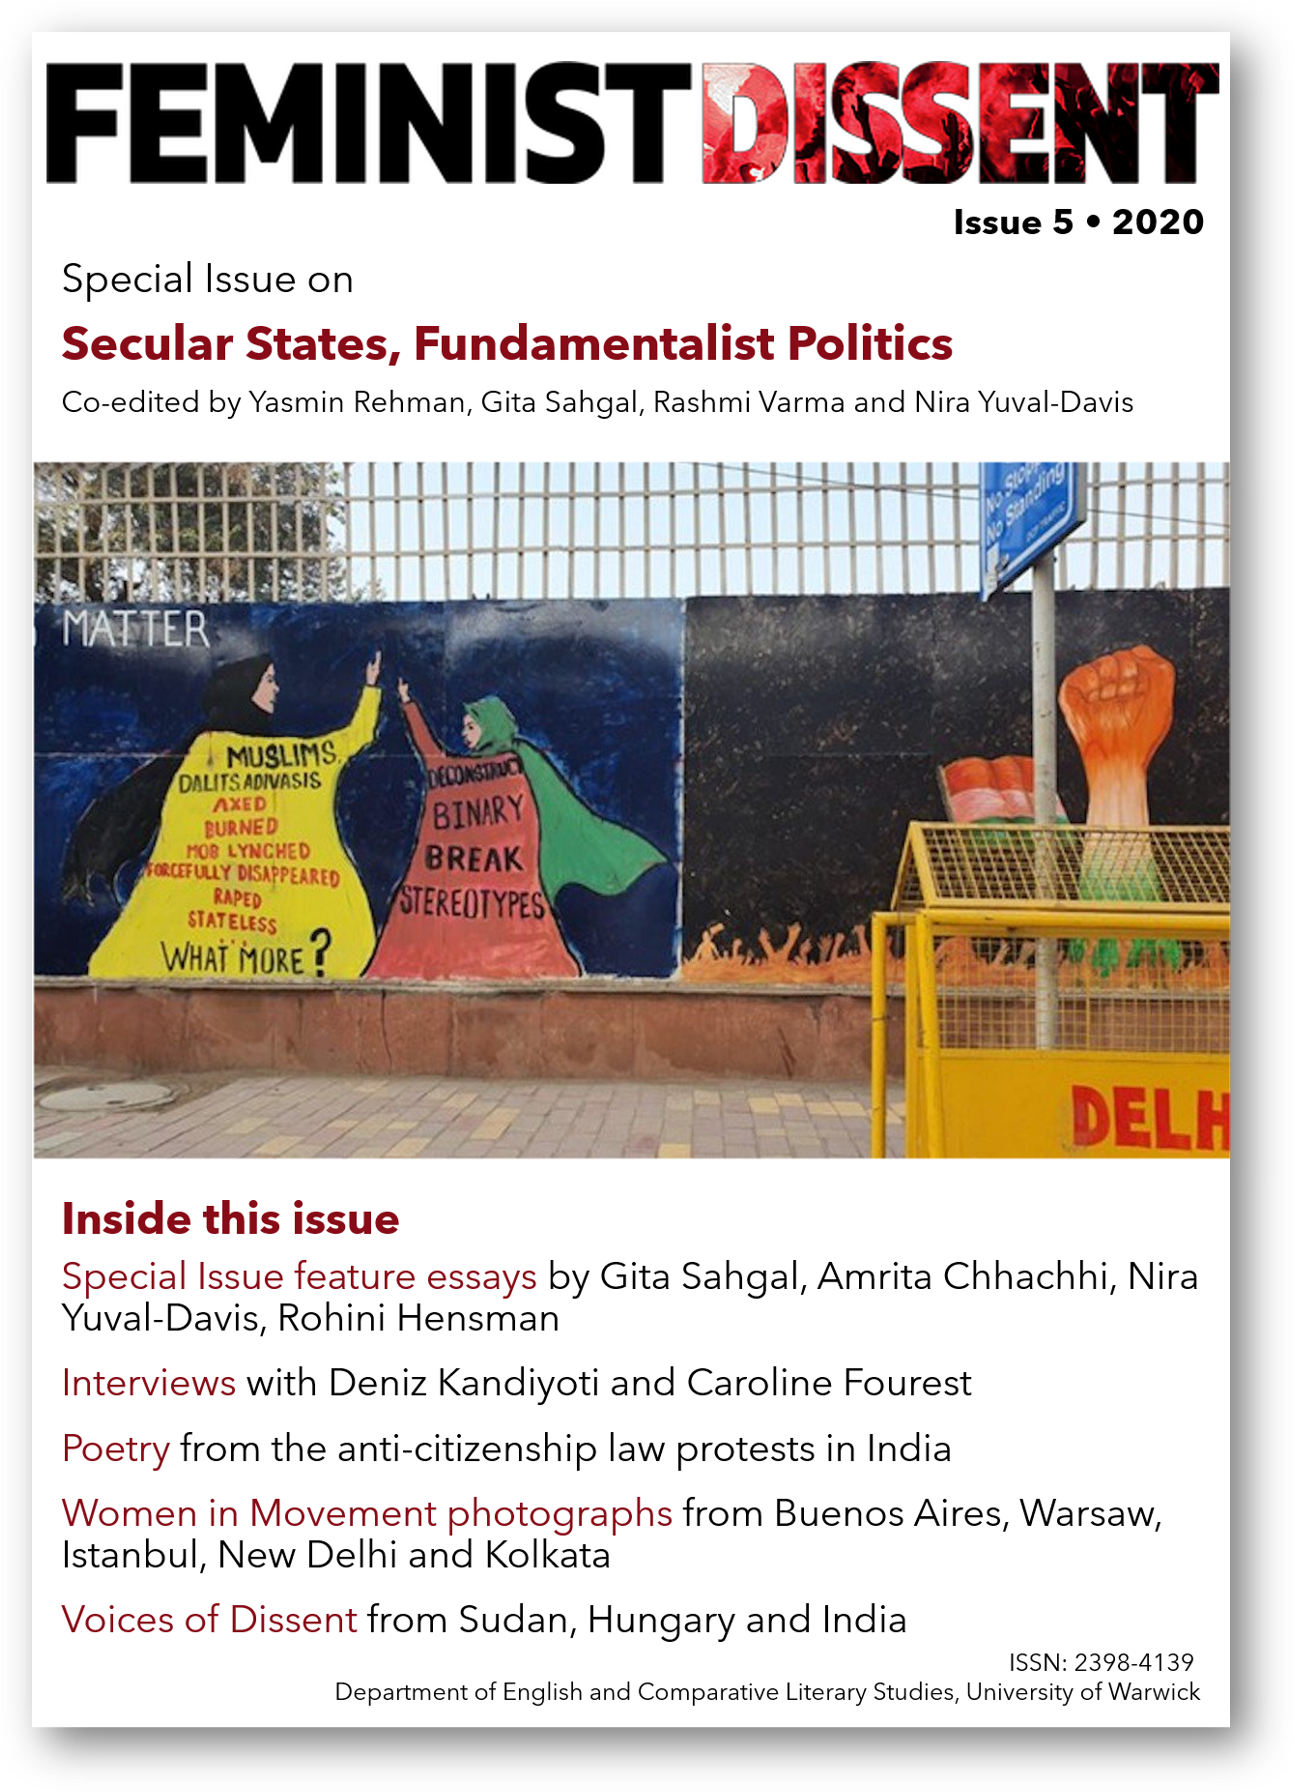 Feminist Dissent, Issue 5, 2020. Special Issue on Secular States, Fundamnetalist Politics, front cover. Image: Murals at Shaheen Bagh by Shirin Rai.